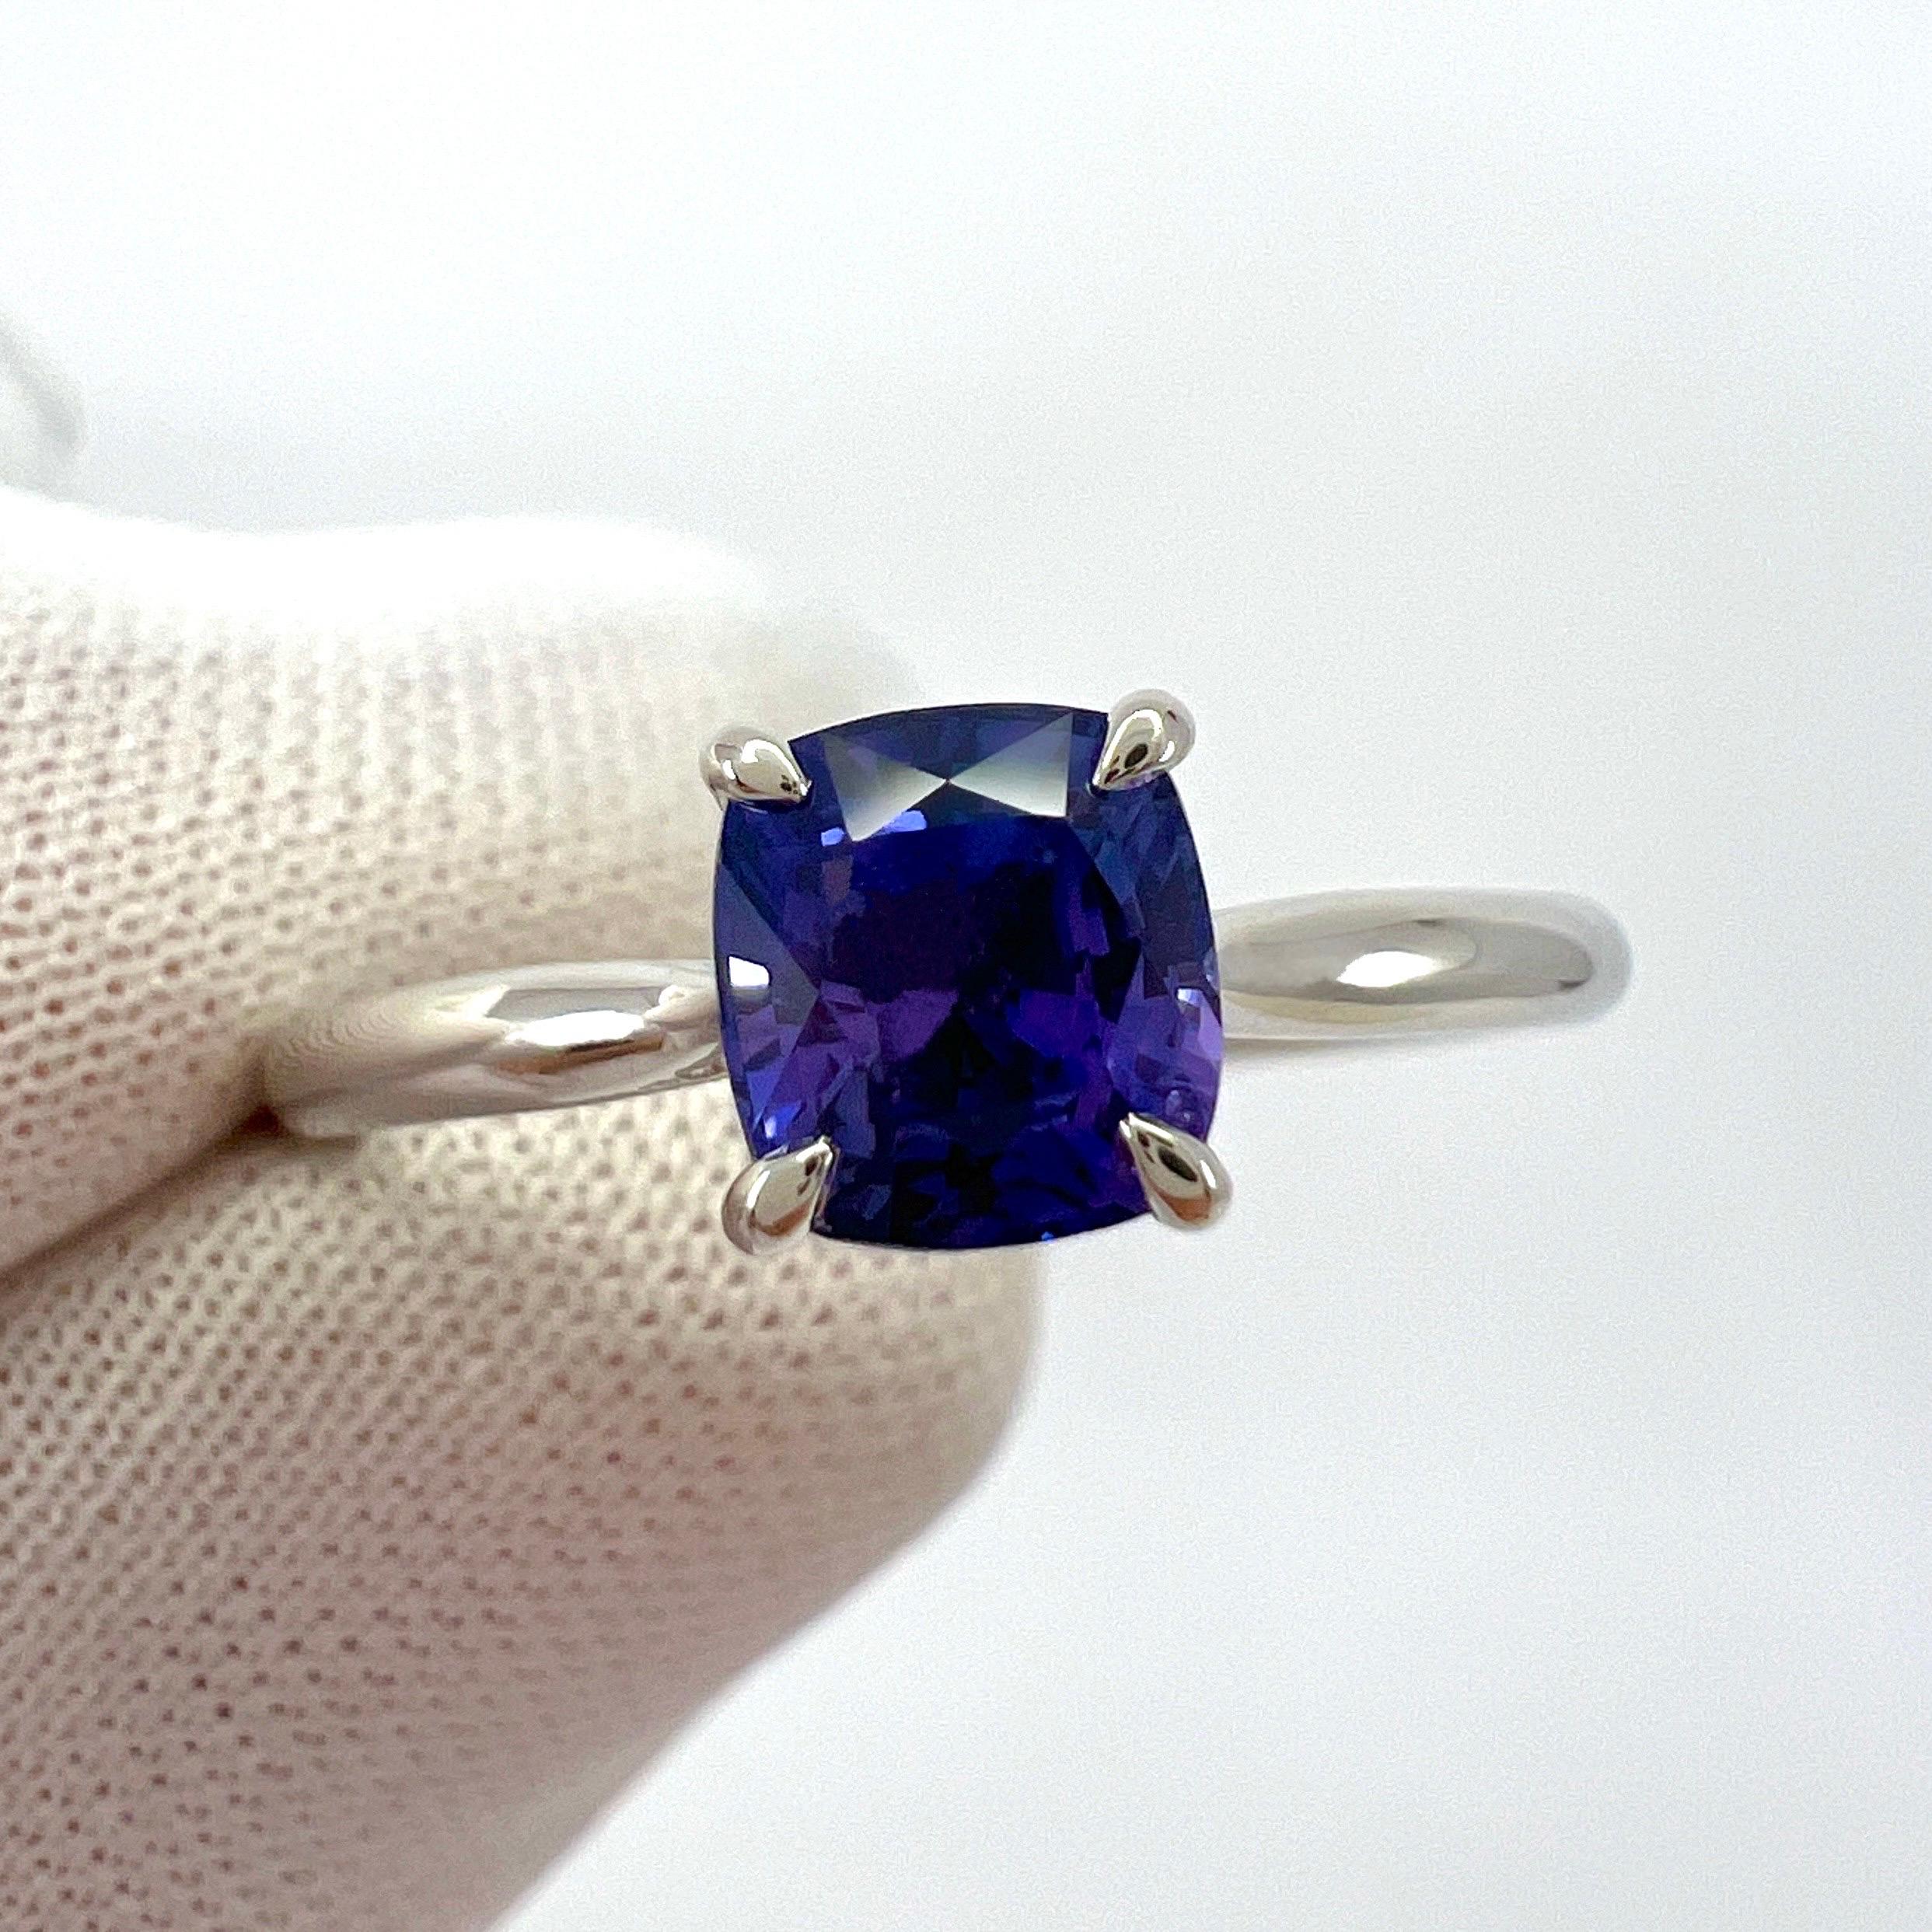 Natural Vivid Violet Blue Cushion Cut Sapphire 18k White Gold Solitaire Ring.

GIA Certified 1.08 carat sapphire with a stunning vivid violetish blue colour and excellent clarity. Very clean stone. VS.
Also has an excellent square cushion cut which